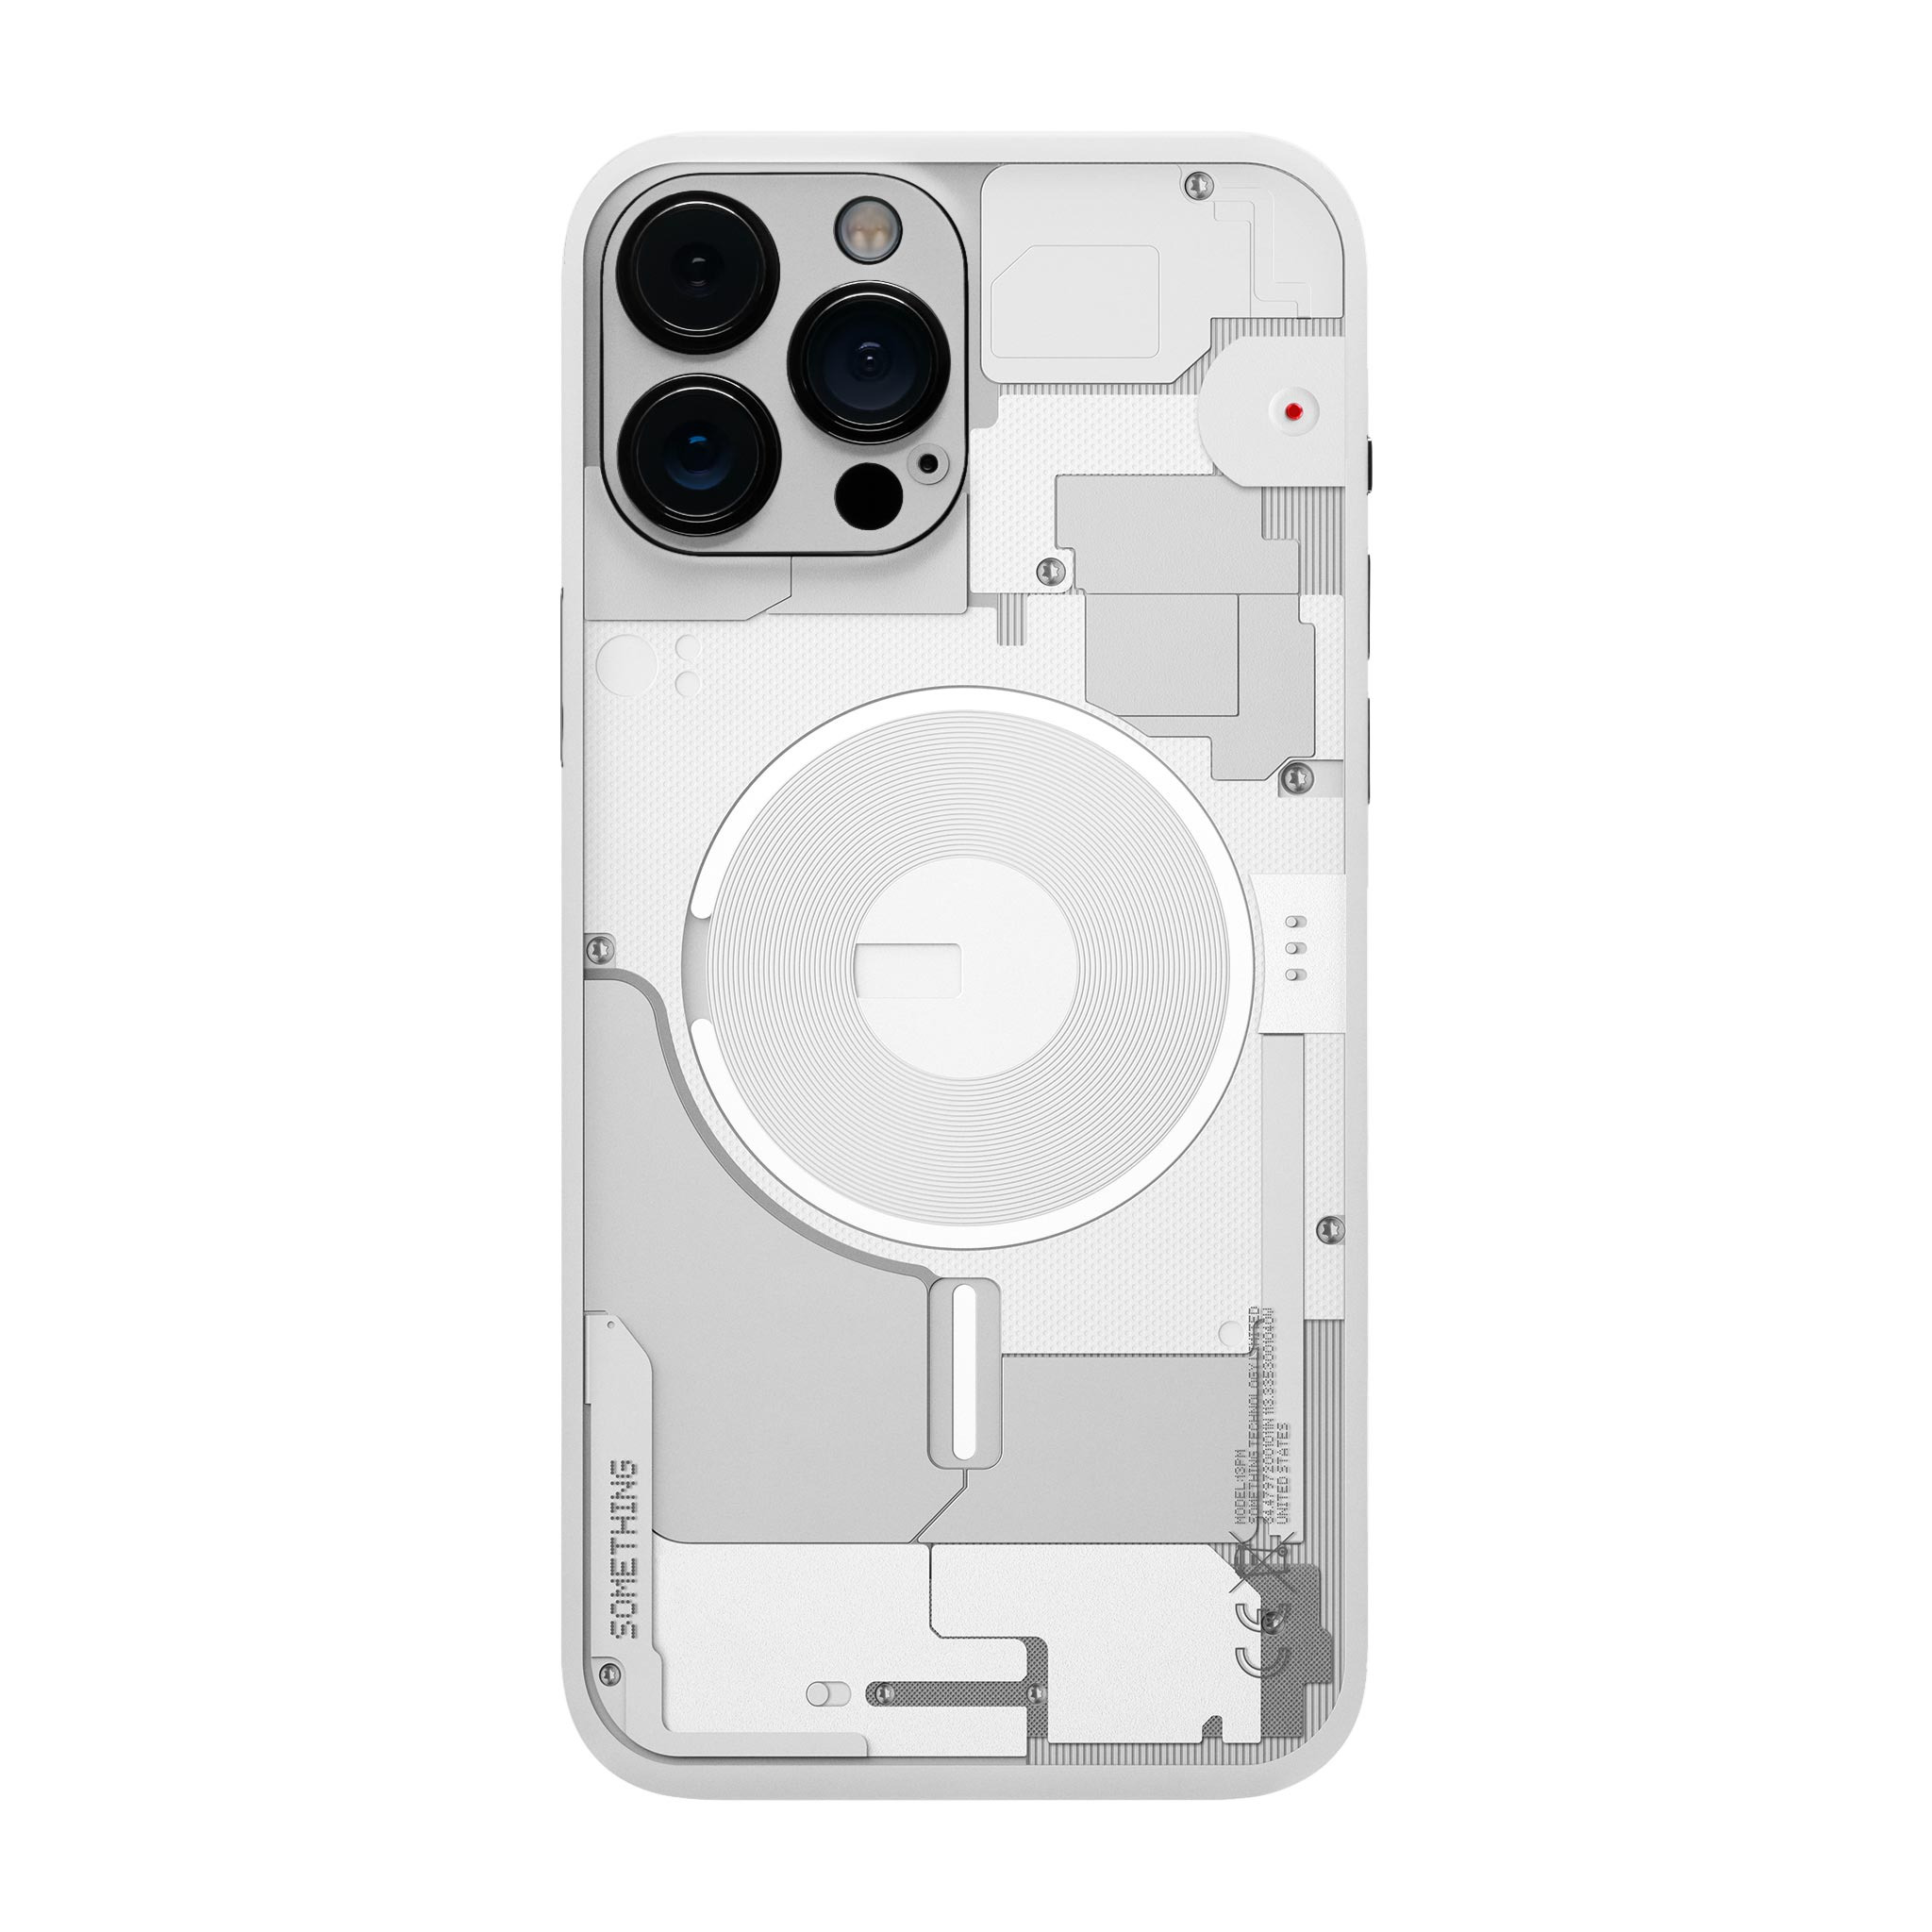 Skin "Something" pour iPhone 13 Pro Max // Source : dbrand